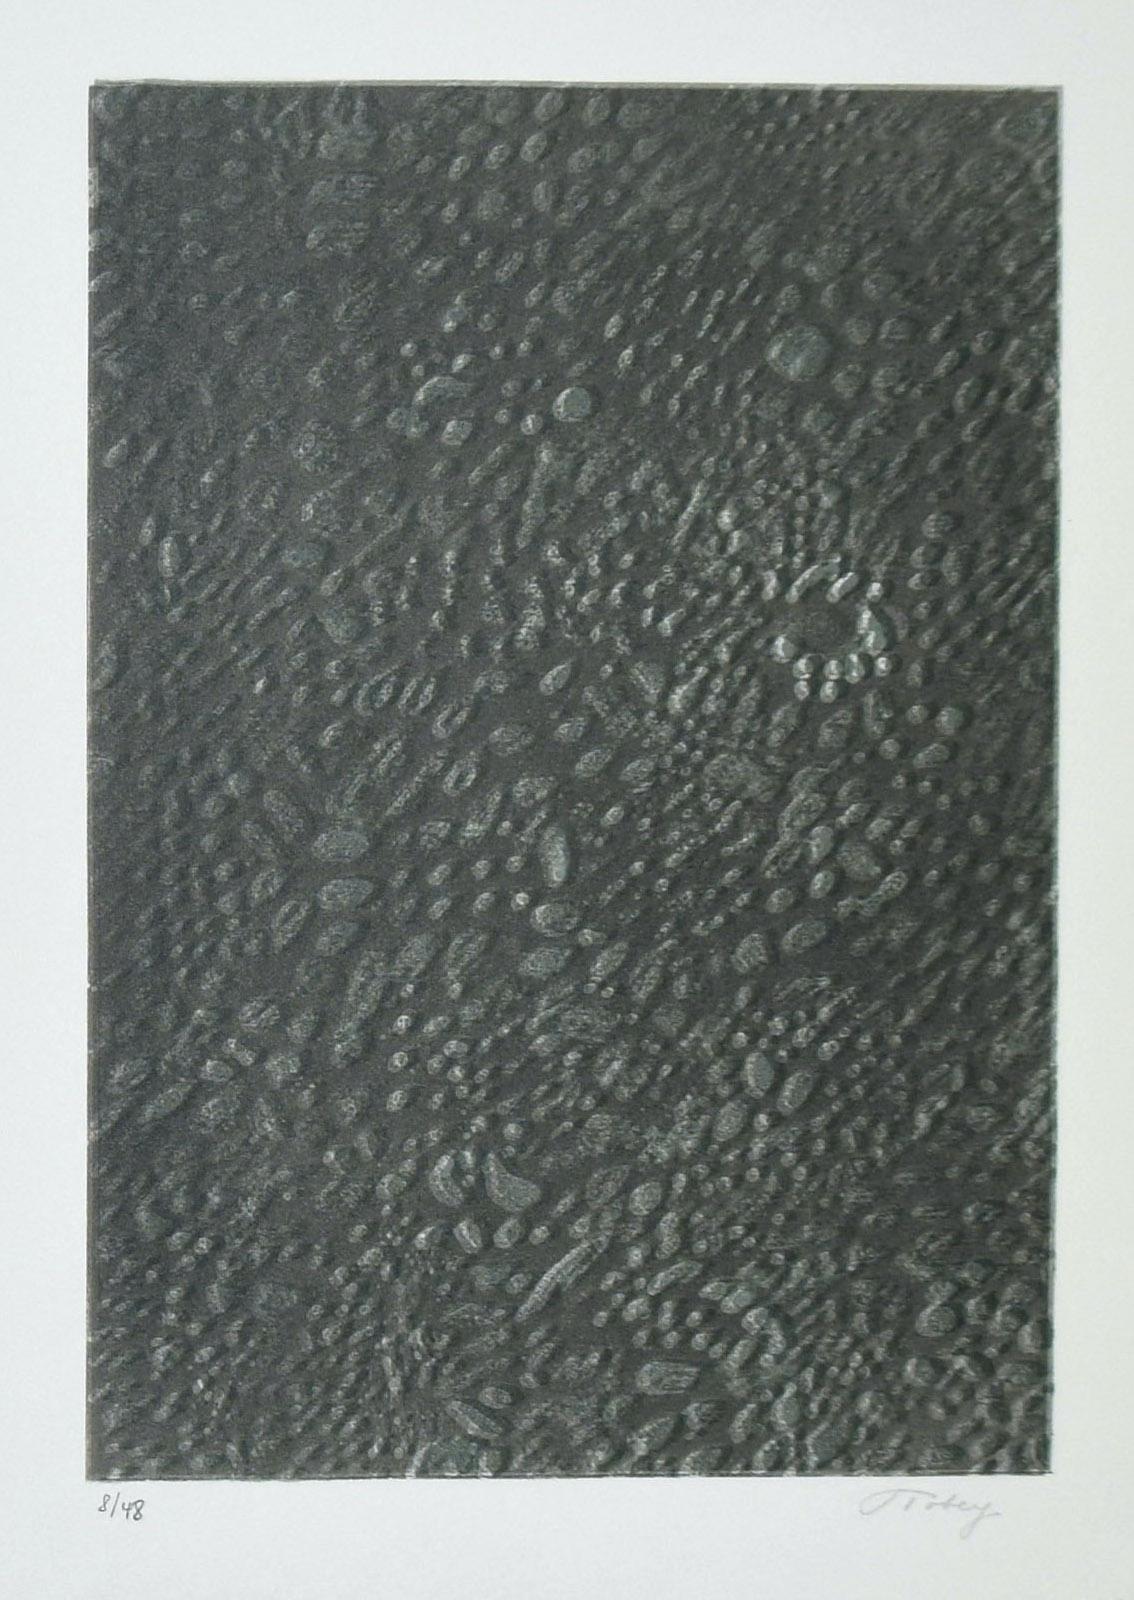 Untitled is a beautiful black and white lithograph realized in the 1970s by the artist, pioneer of Abstract Expressionism, Mark Tobey.

This original print is signed and numbered in pencil on the lower margin. Edition of 48 prints.

Very good